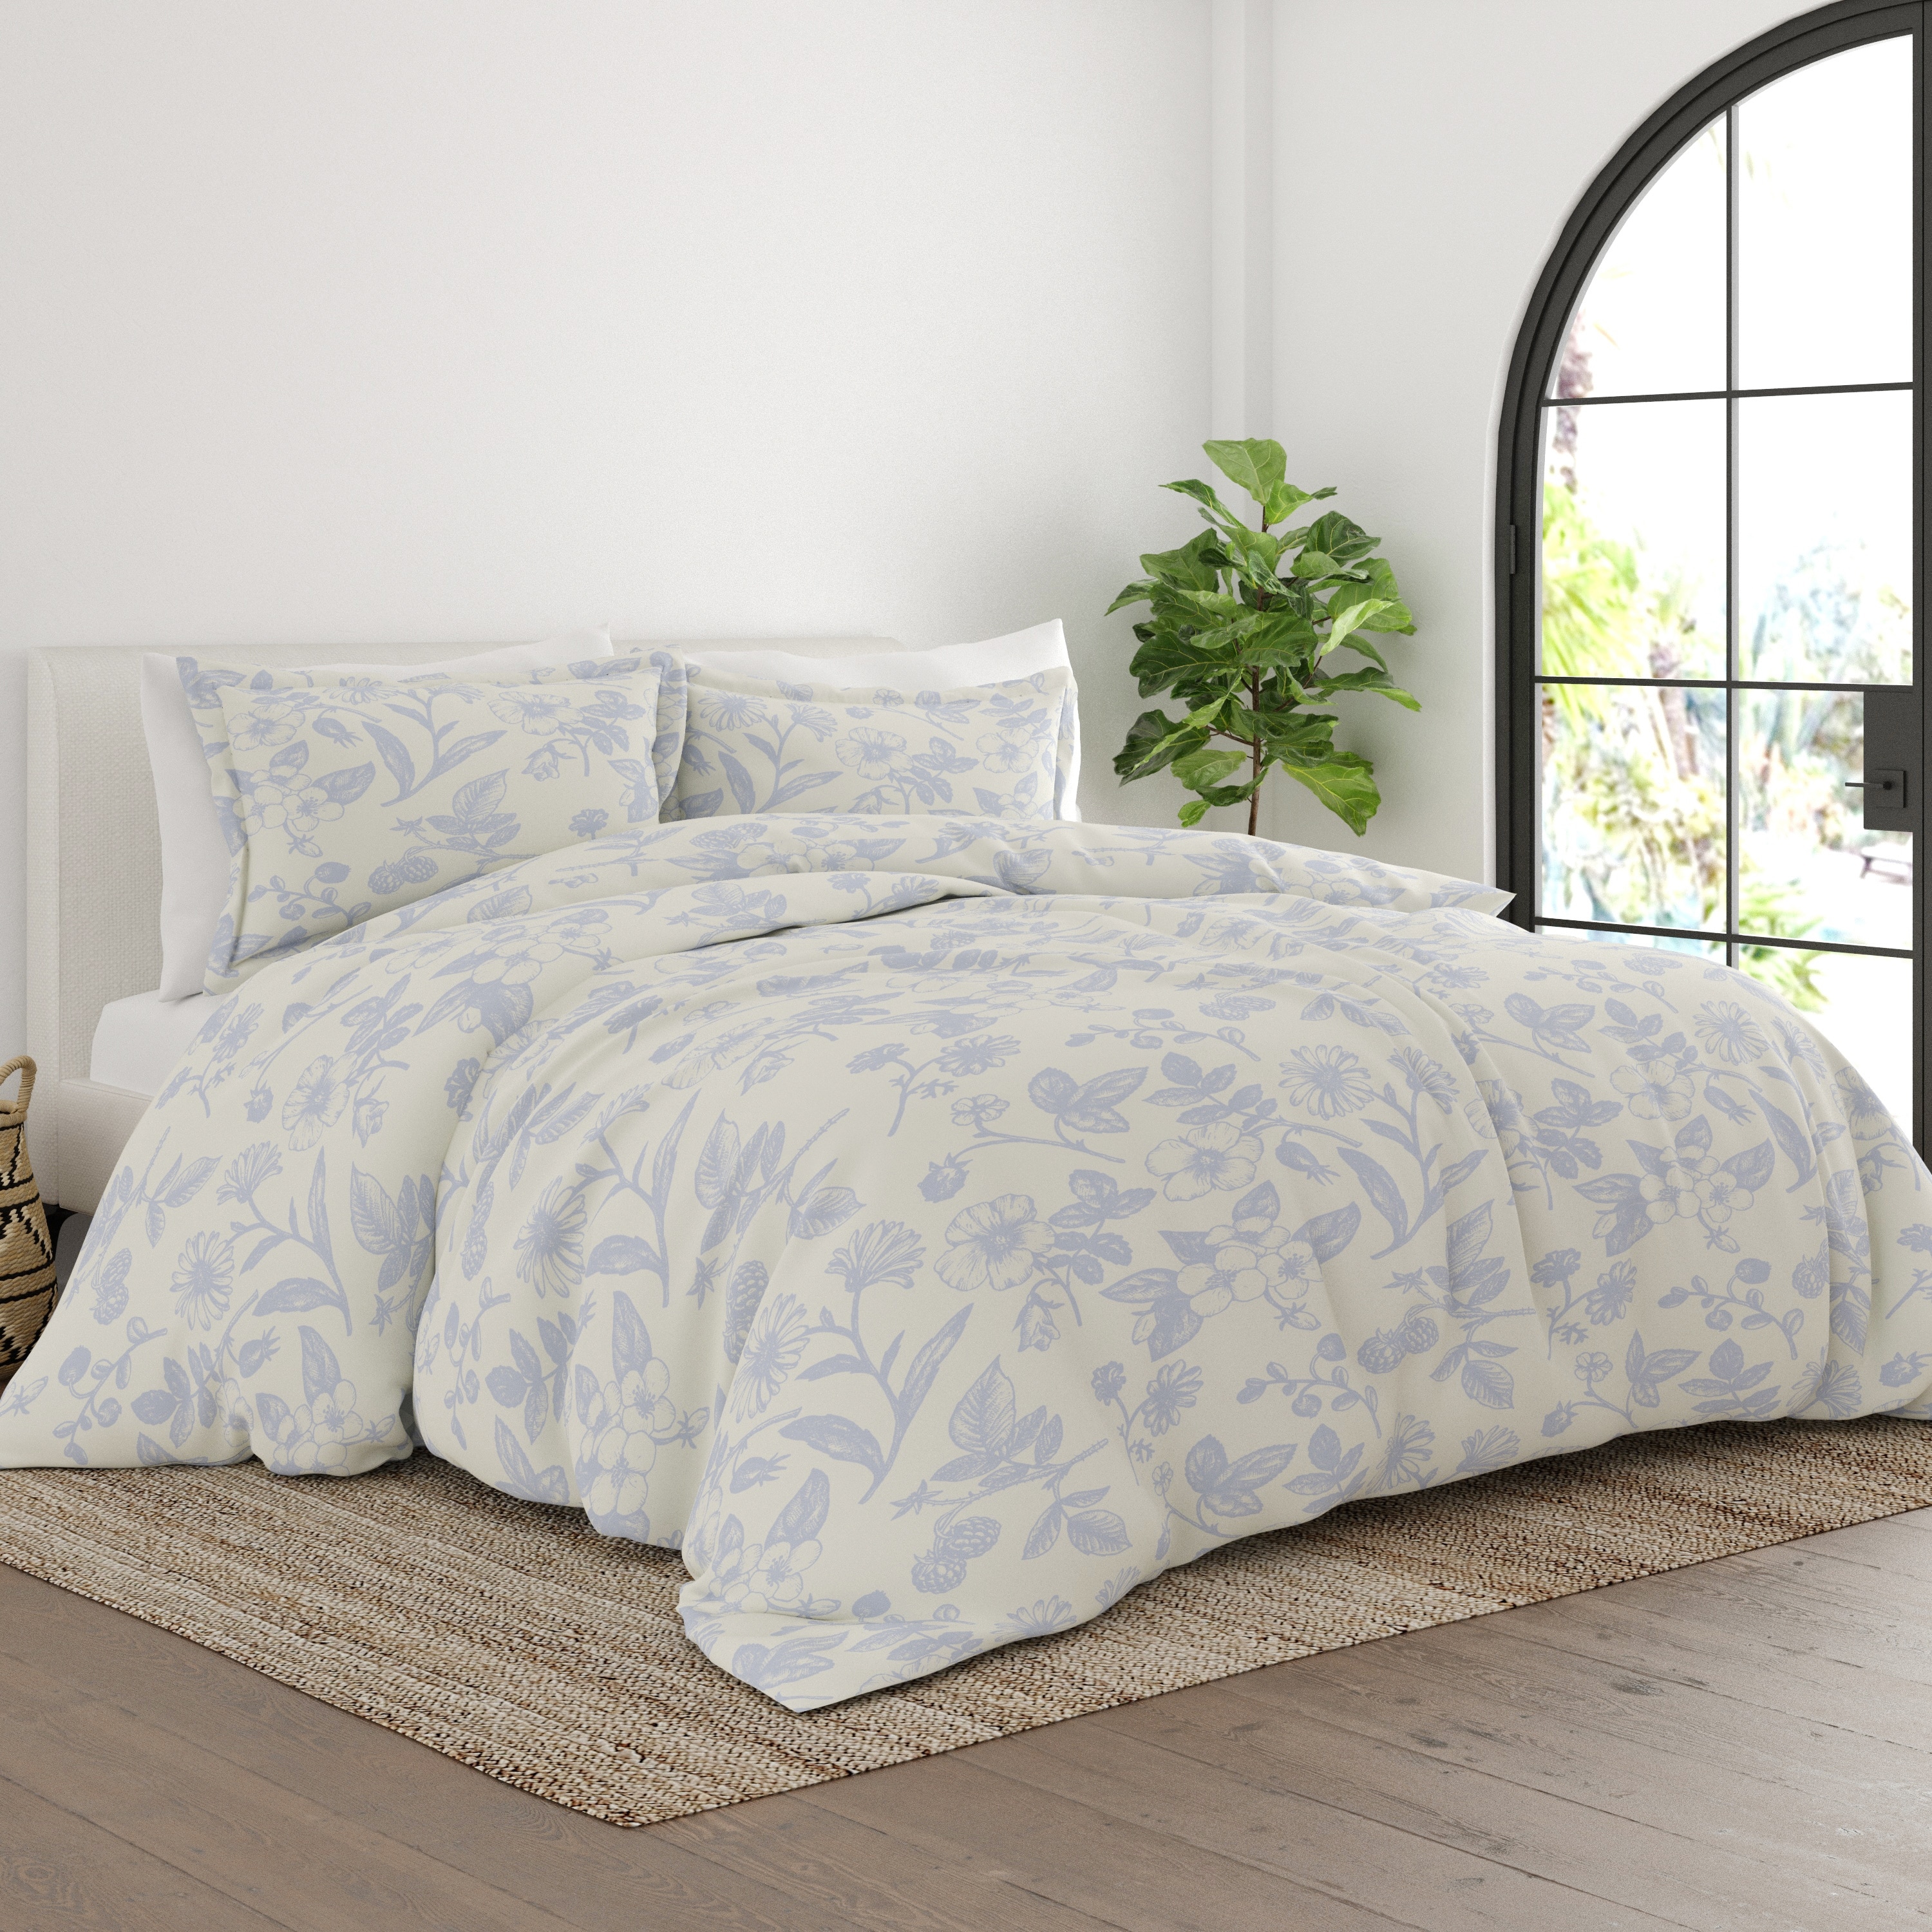 Farmhouse Duvet Covers and Sets - Bed Bath & Beyond